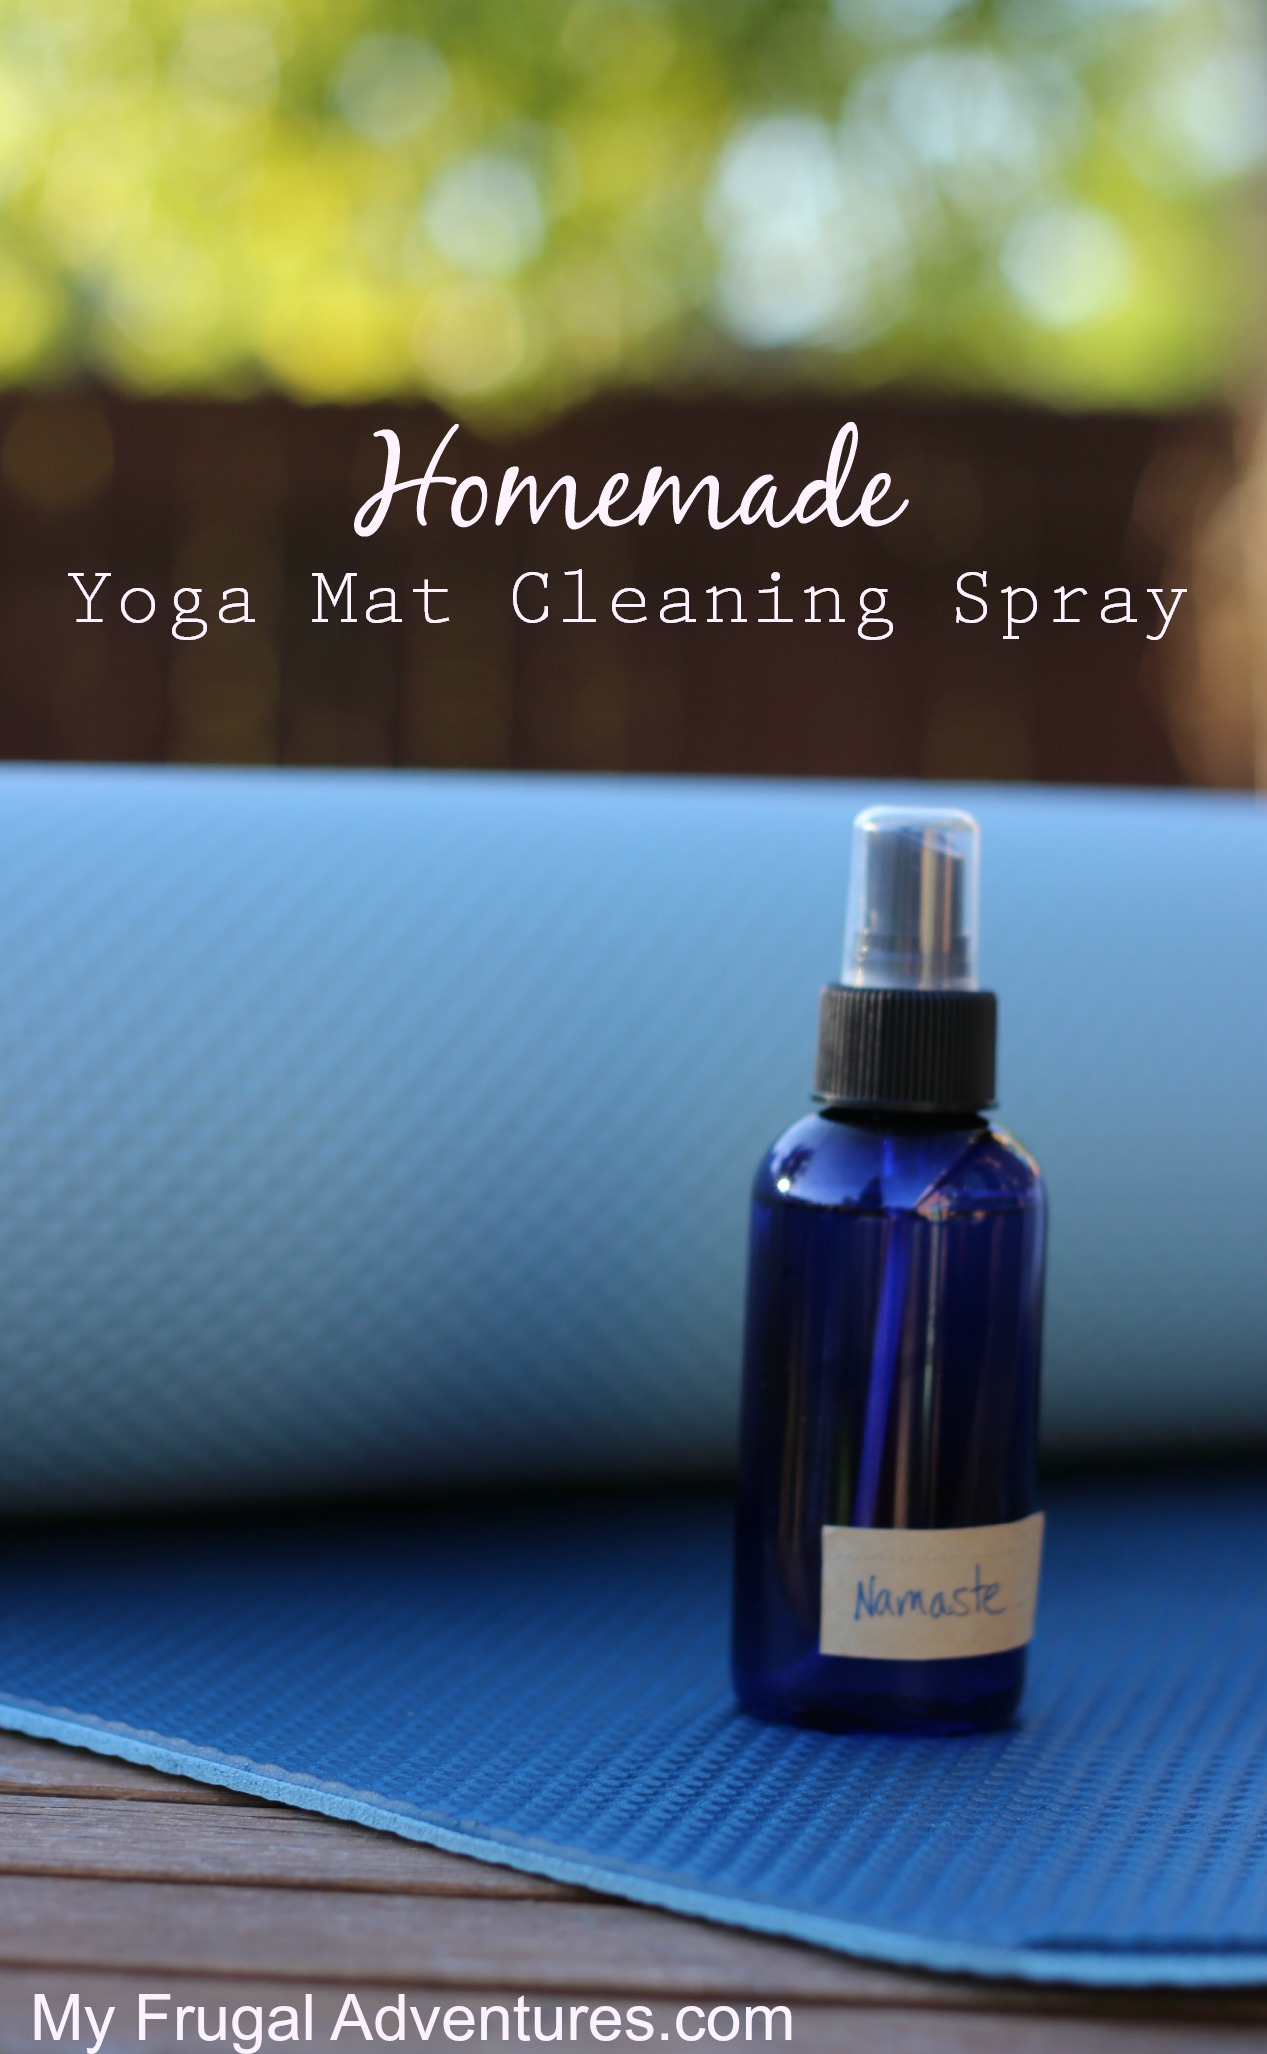 How to Make Your Own DIY Yoga Mat Cleaner Spray